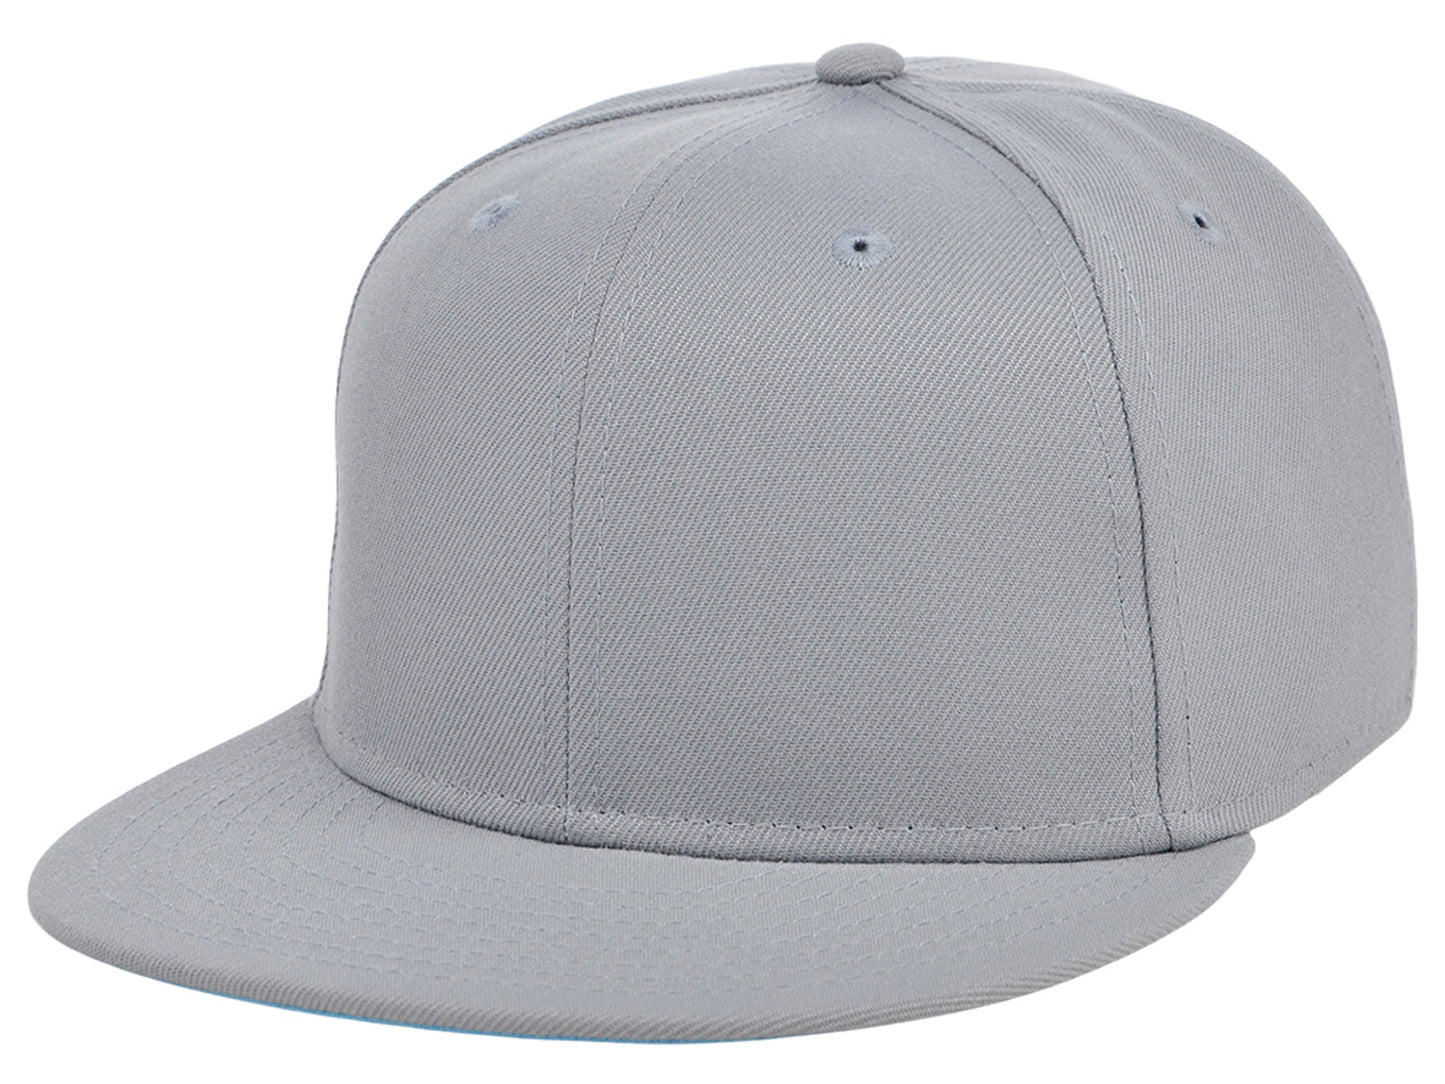 Crowns by Lids Full Court Fitted UV Cap - Light Grey/Sky Blue